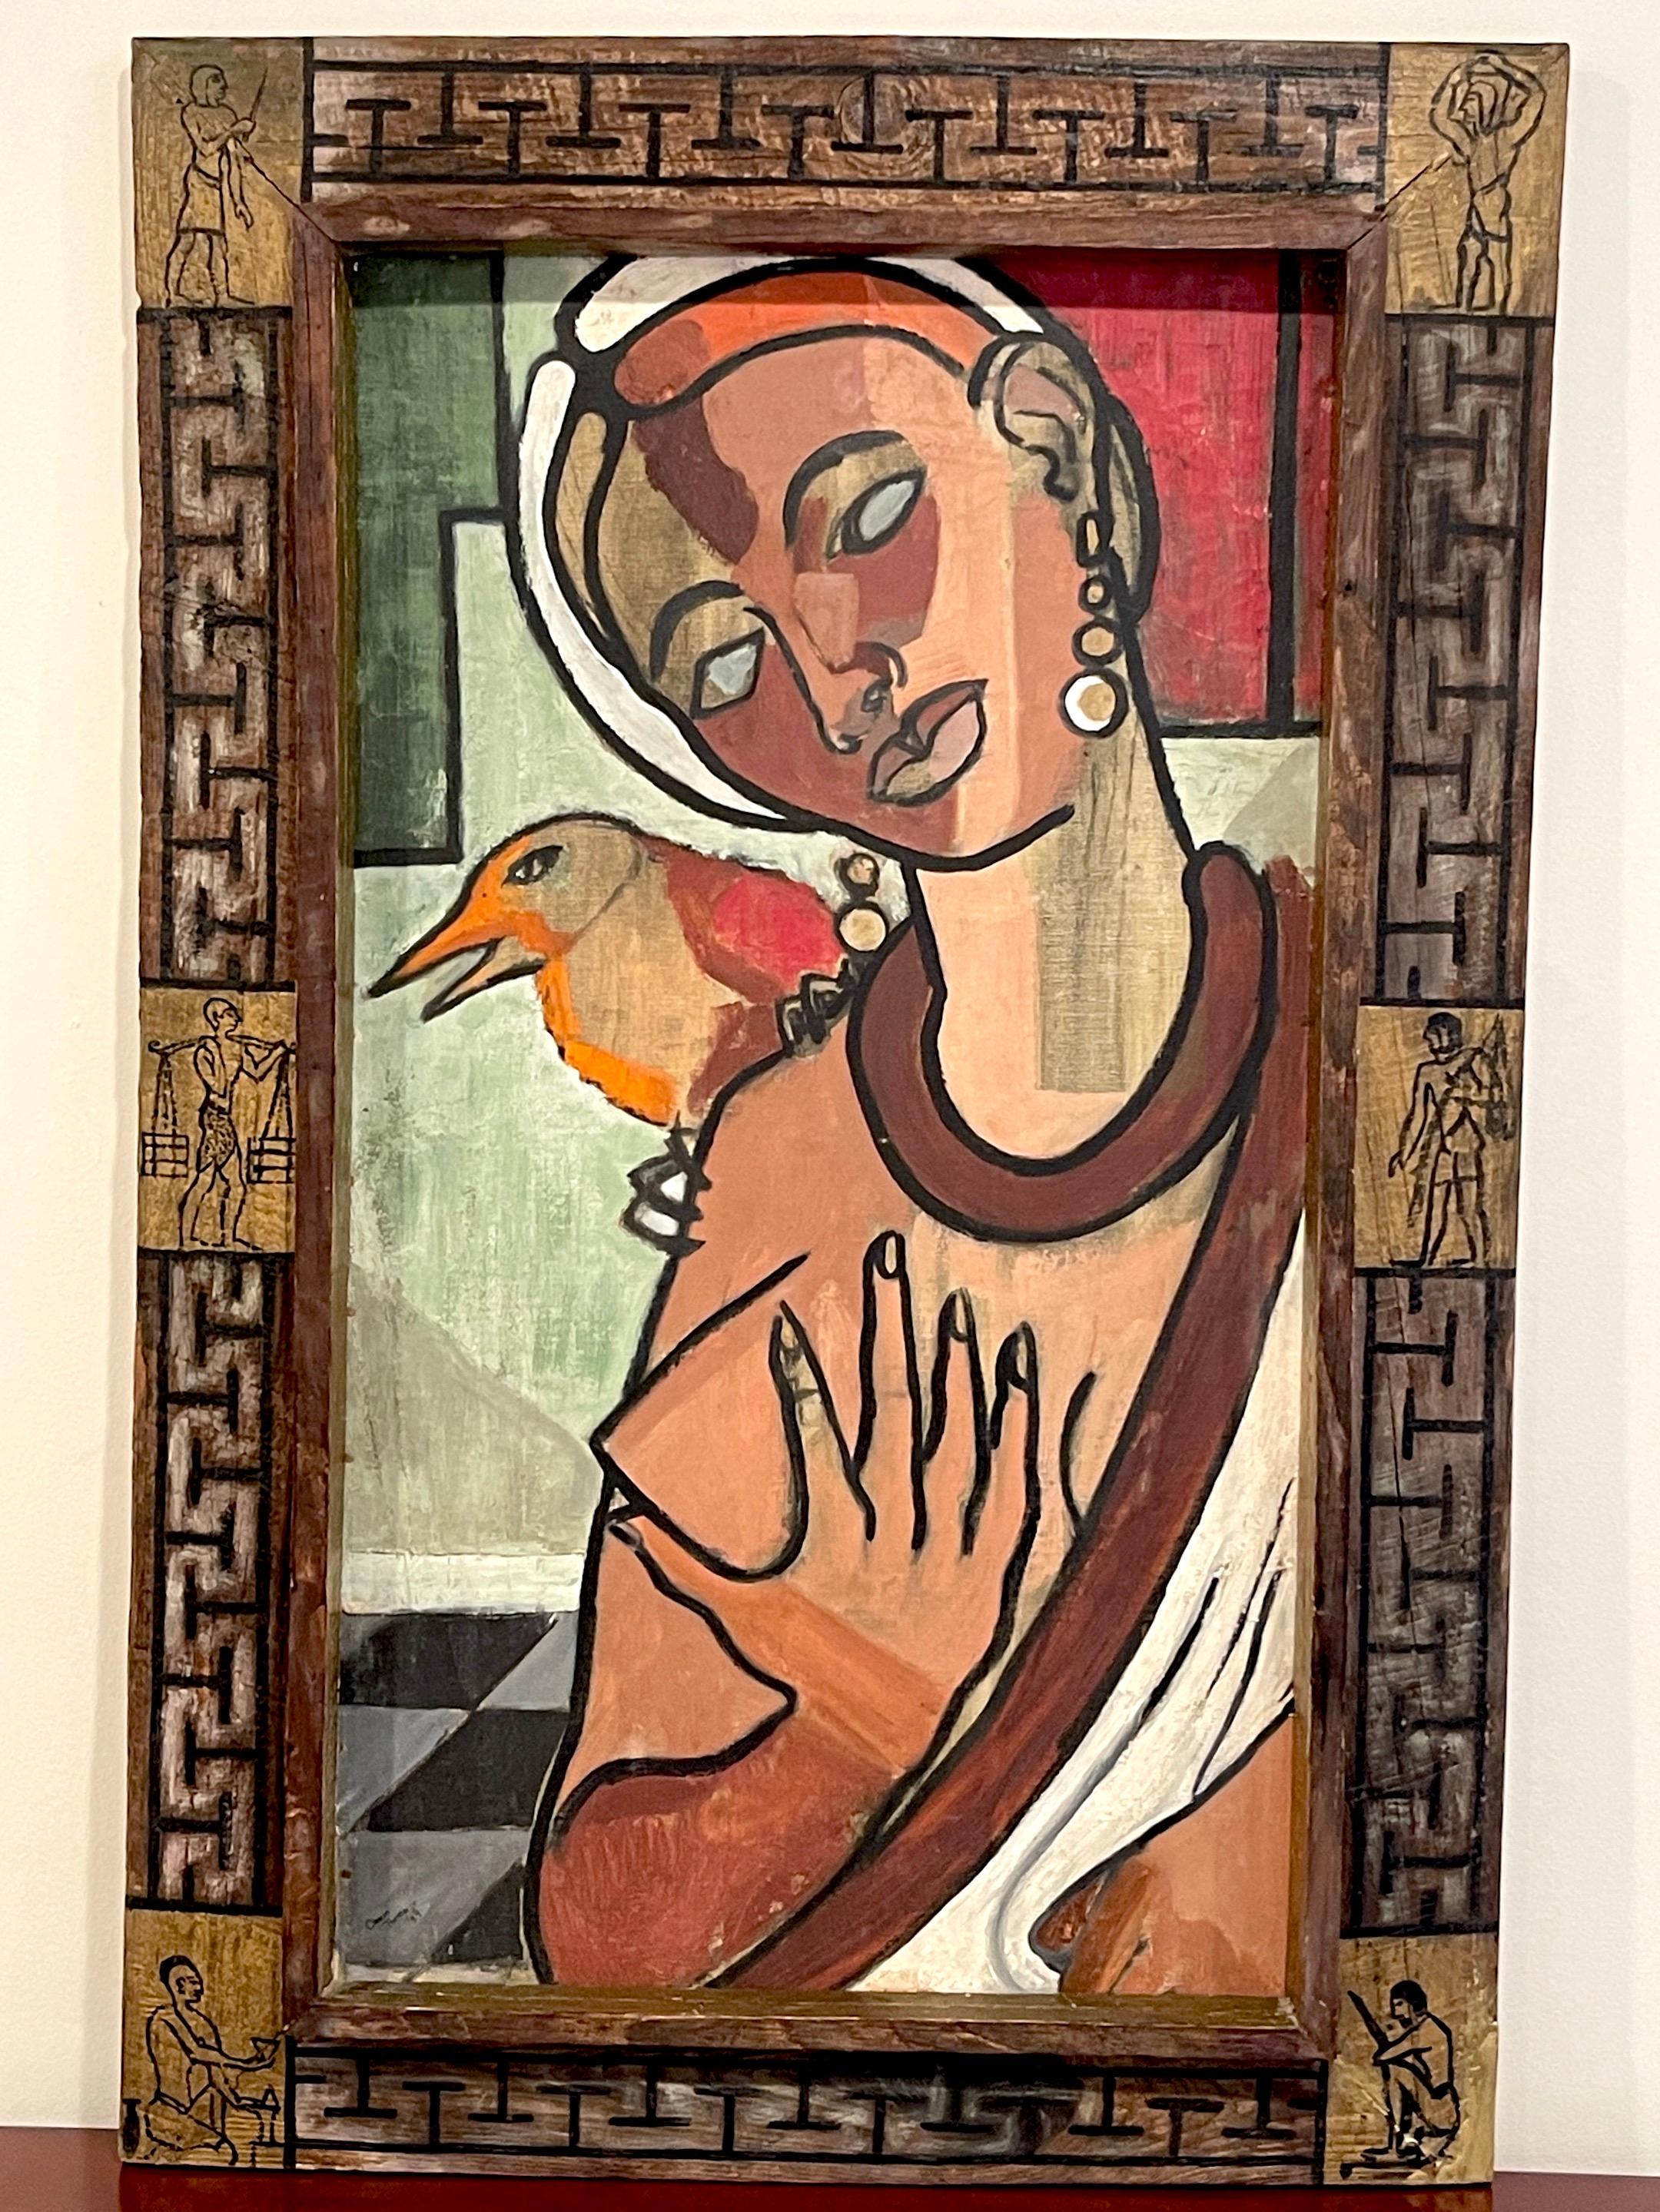 Cubist portrait of Cleopatra & Hawk, by Clevan Thomas Jr. 1944
A masterwork of 1940s modern American outsider Art, by relativity unknown southern African -American artist Clevan Thomas Jr.
Signed lower left 'Clevan Thomas Jr., 44'

This work